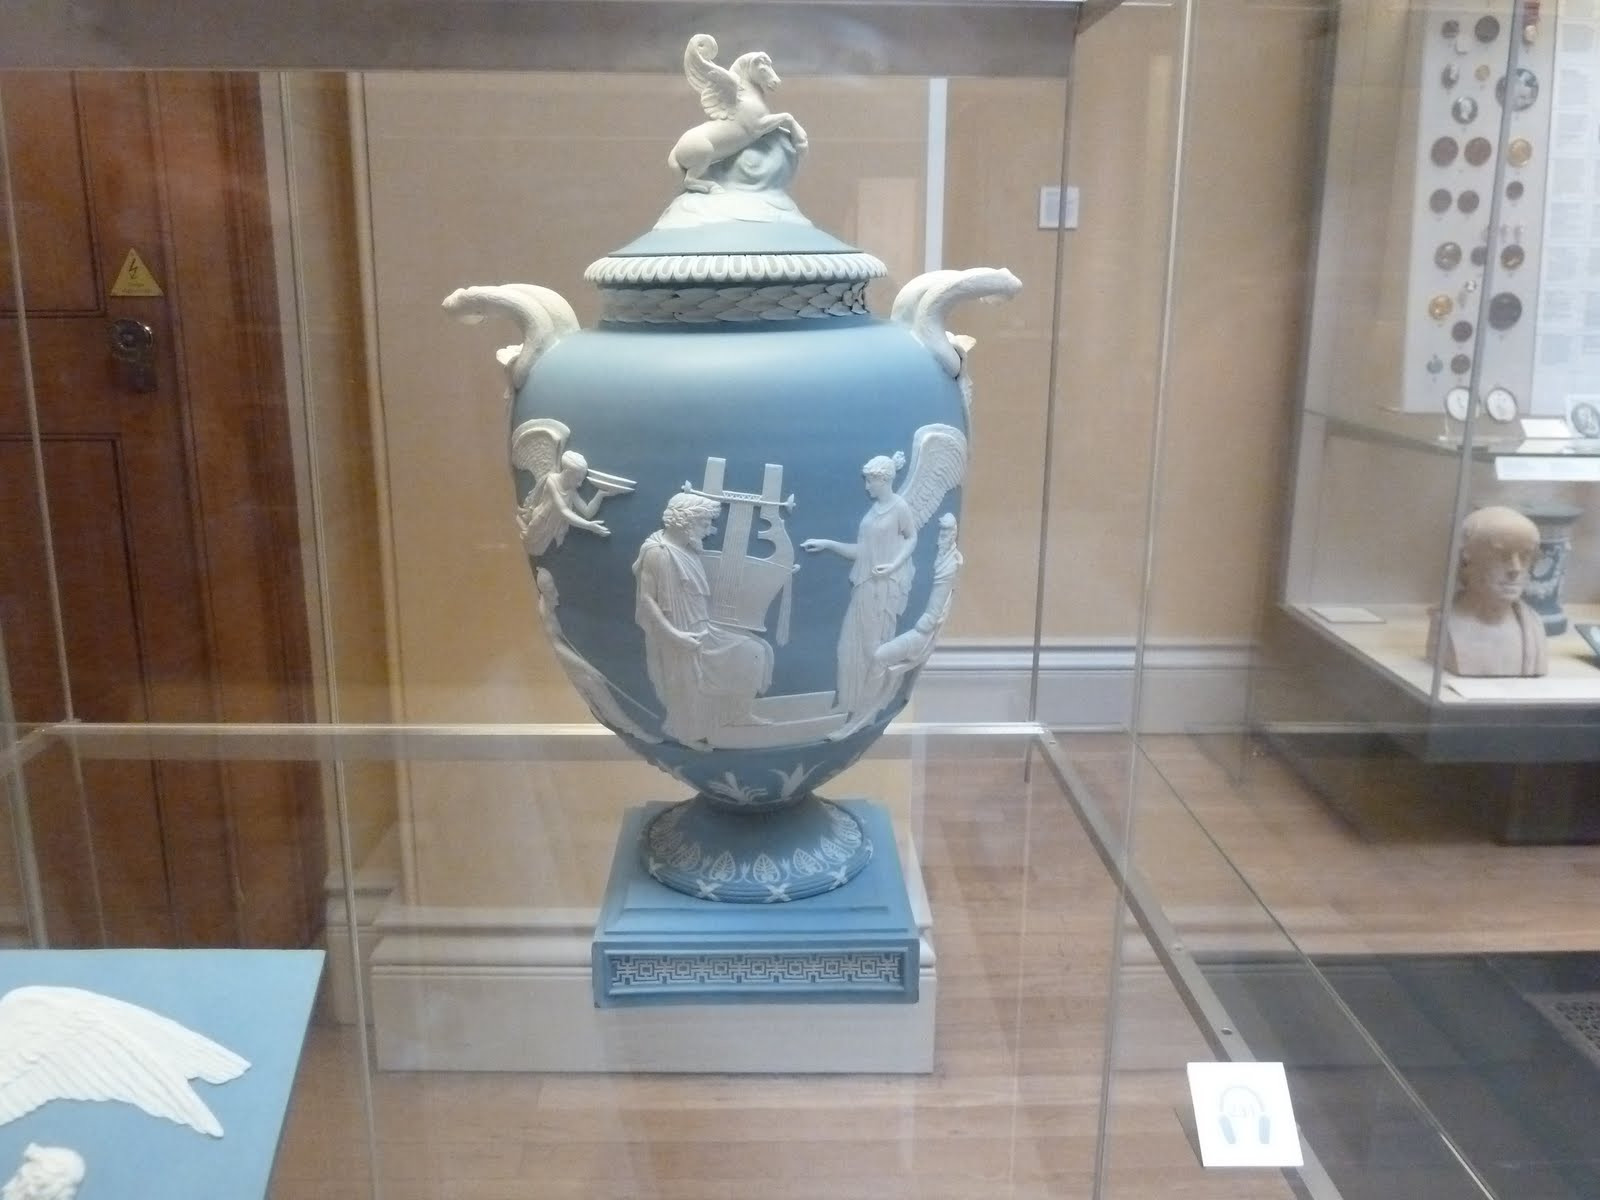 Wedgwood Portland Vase Of Travels with Victoria Page 9 Number One London with Regard to the Pegasus Vase Jasperware Thrown with Applied Reliefs England Staffordshire Josiah Wedgwood 1786 the Main Scene Designed In 1778 by John Flaxman